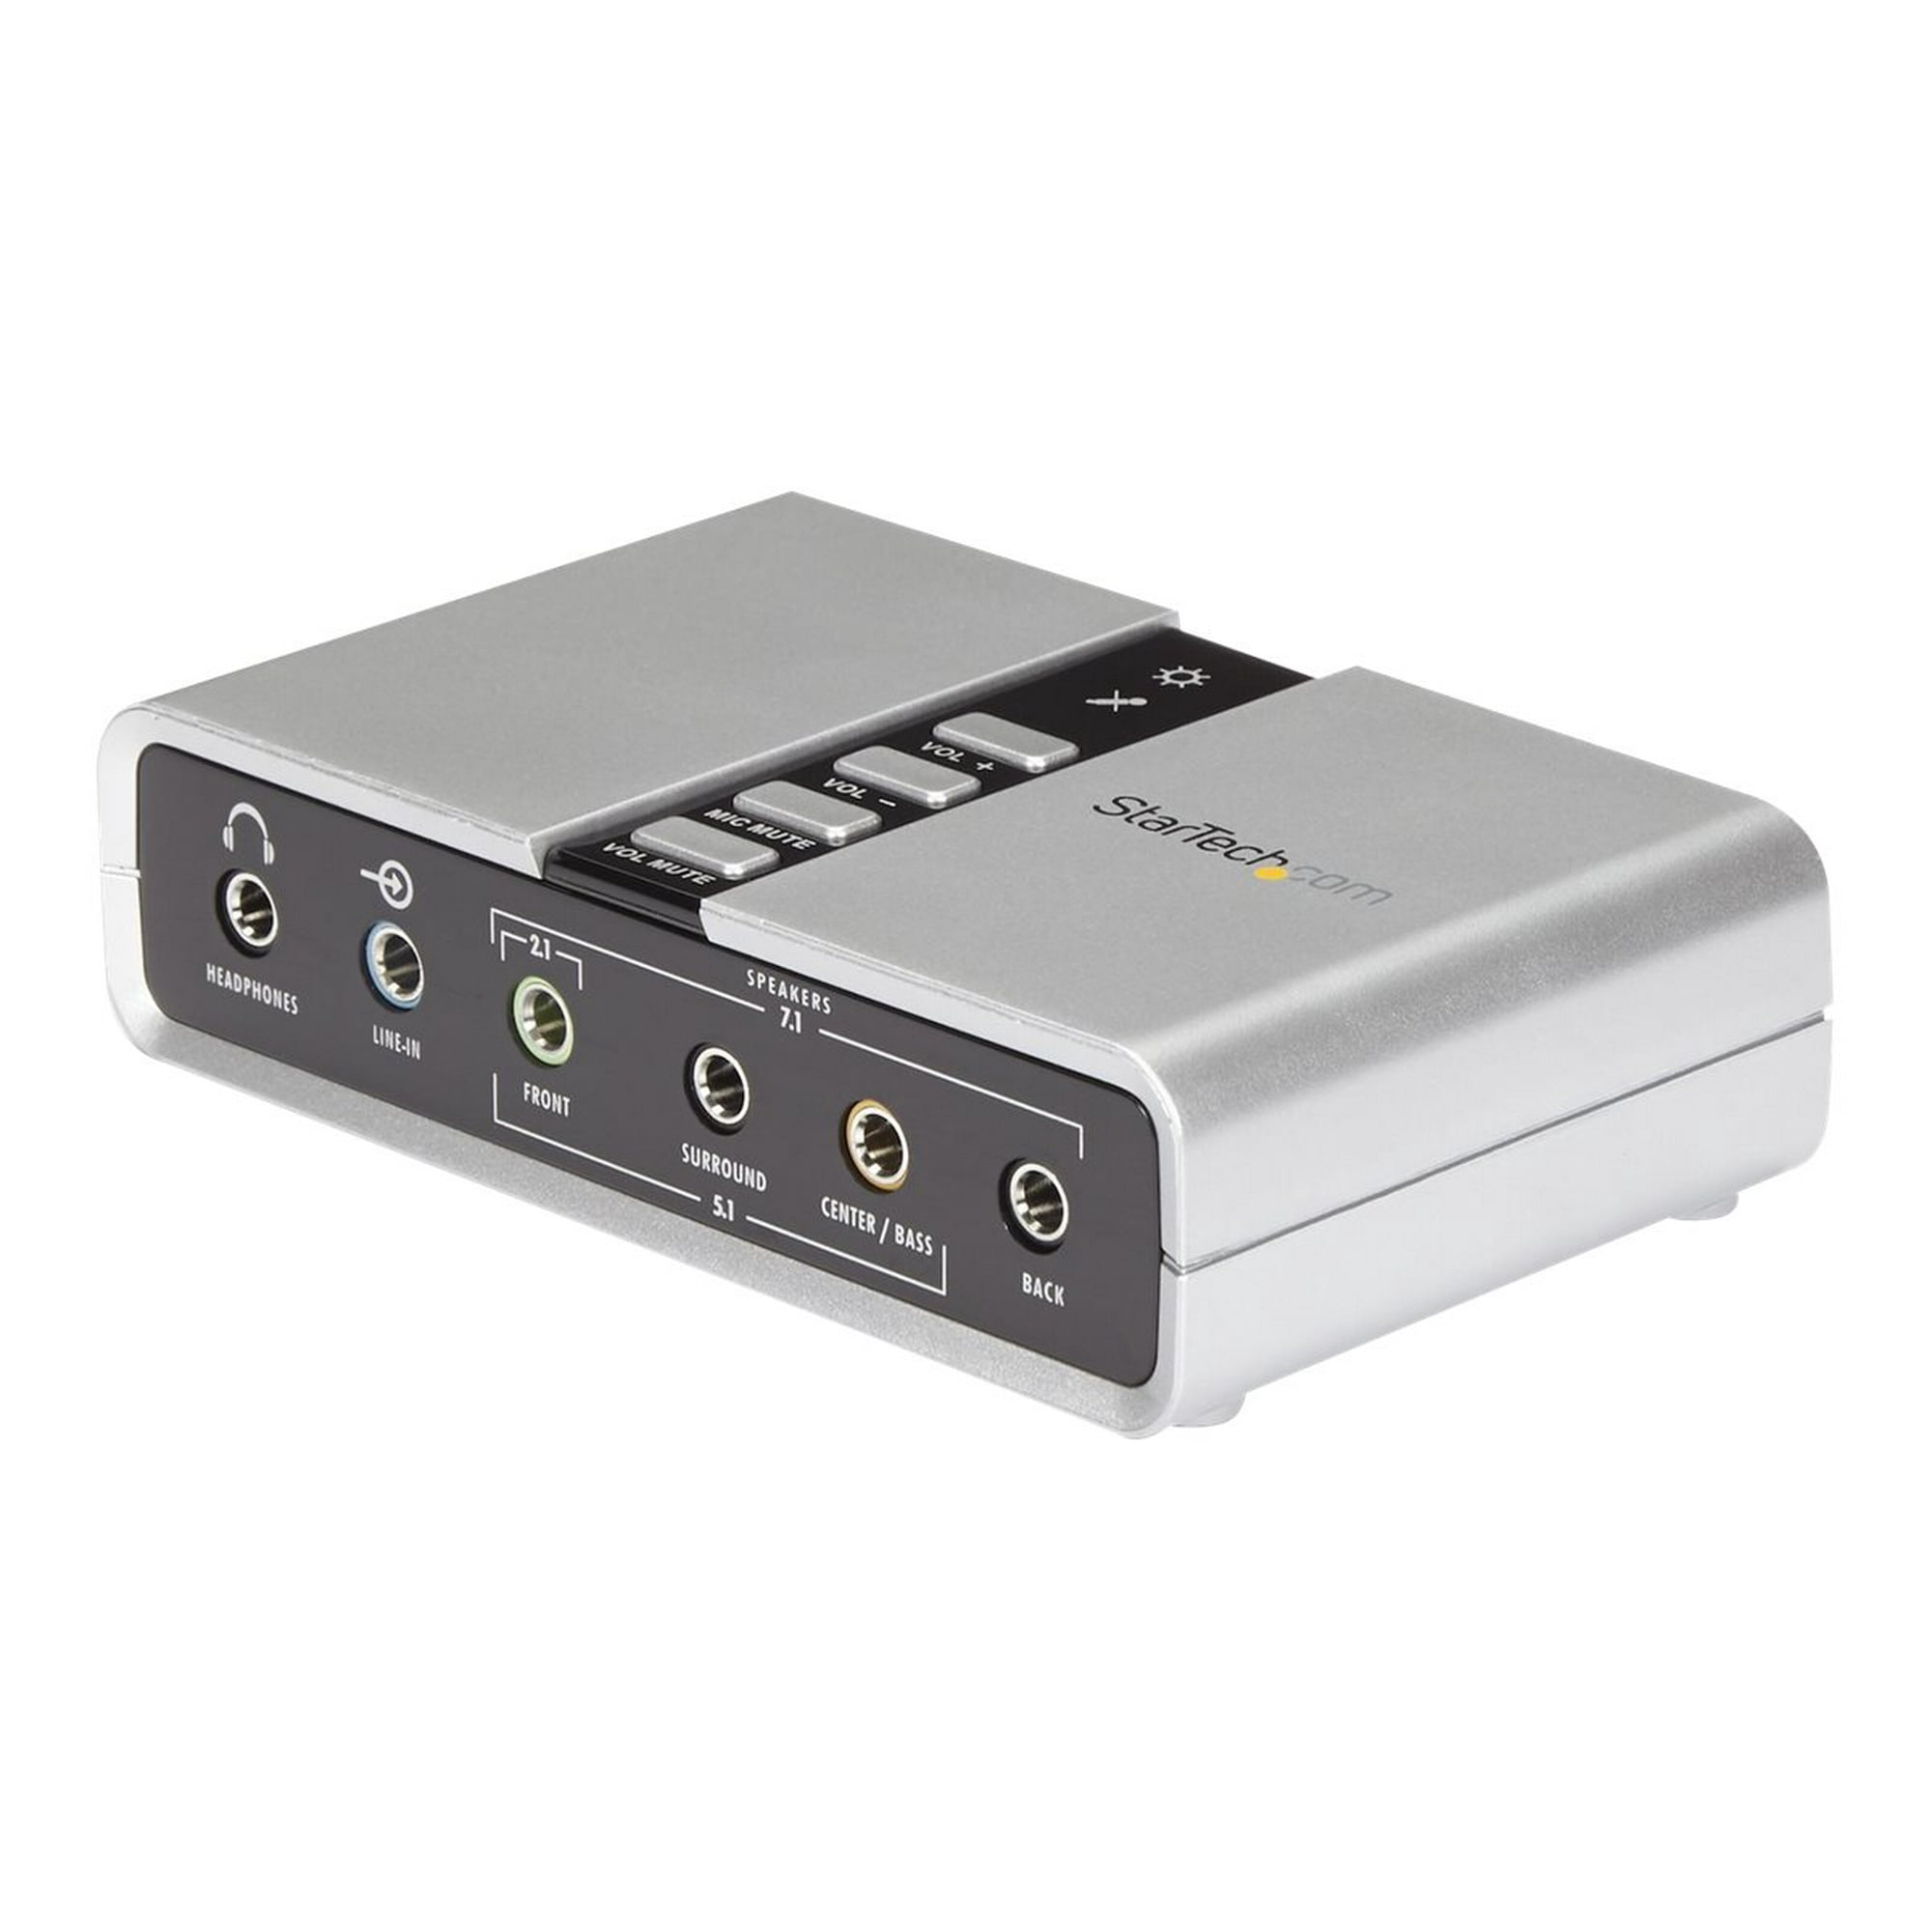 sneen vigtig blomst StarTech.com 7.1 USB Sound Card - External Sound Card for Laptop with SPDIF  Digital Audio - Sound Card for PC - Silver (ICUSBAUDIO7D) - Sound card - 48  kHz - 7.1 - USB 2.0 - for P/N: MU15MMS, MU6MMS | Walmart Canada